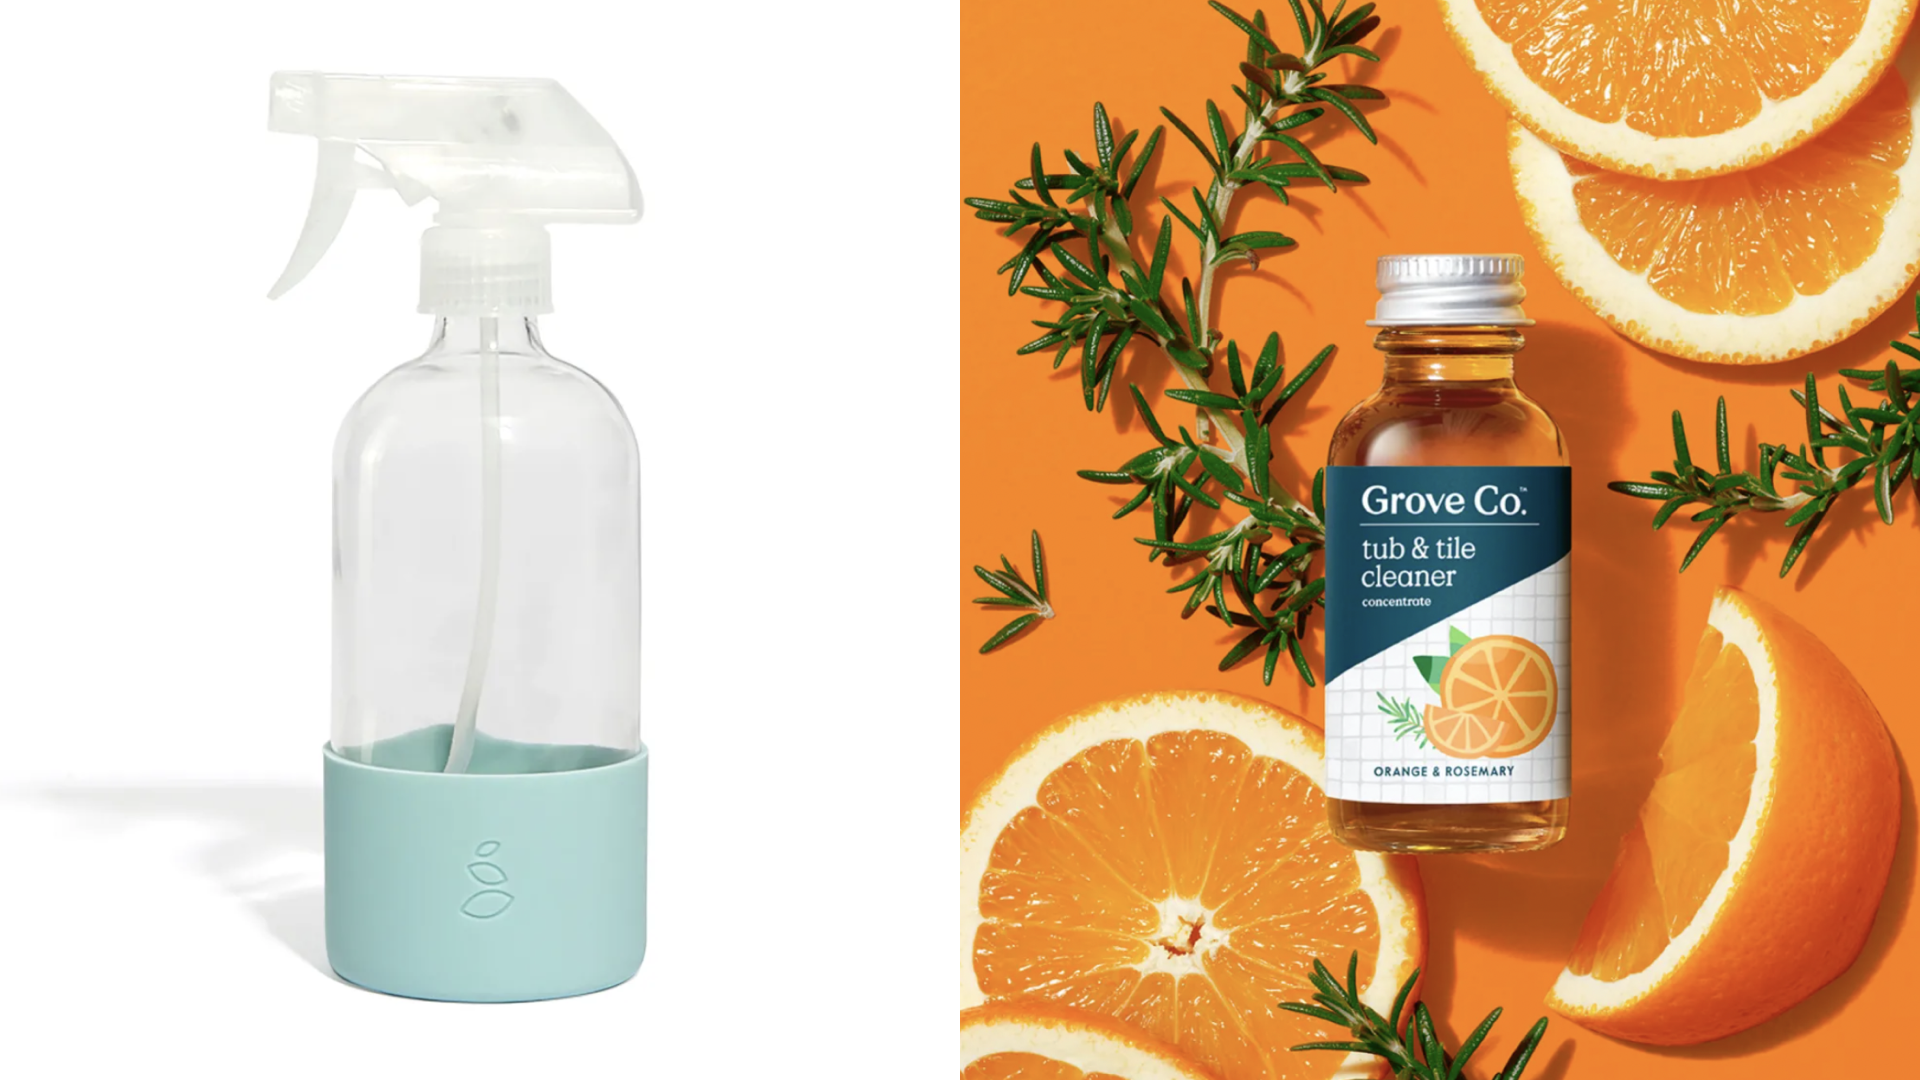 GroveCo refillable bottle and tile solution